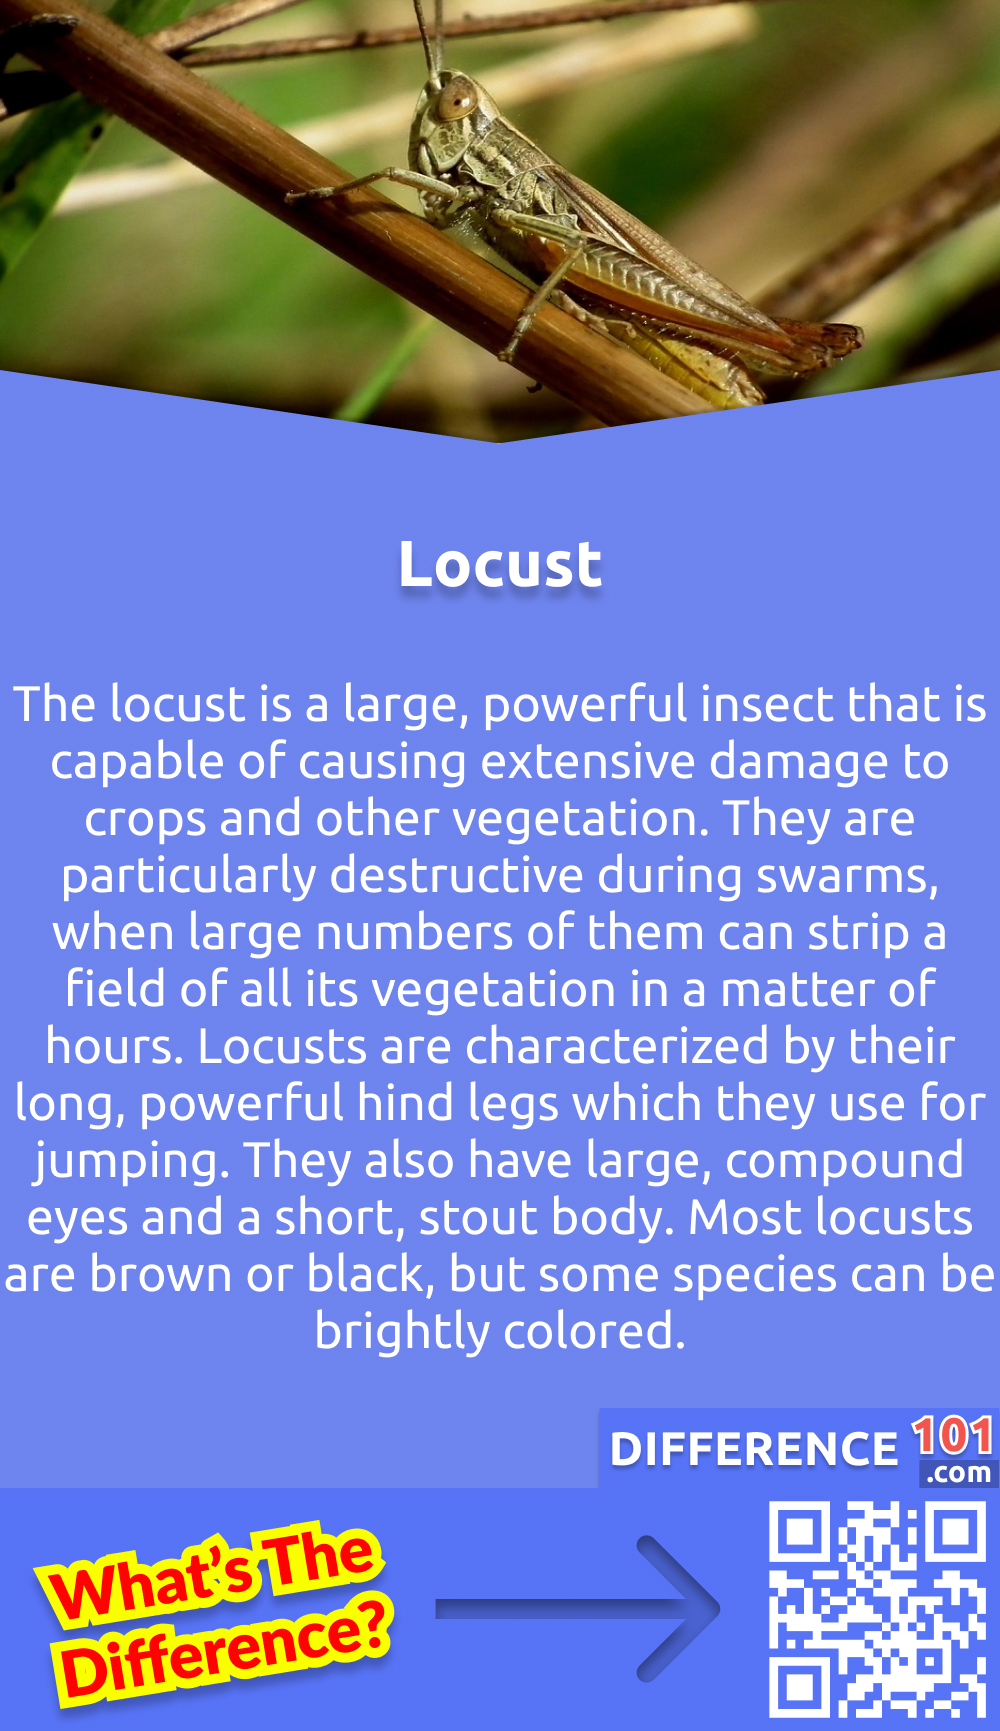 What Is Locust? The locust is a large, powerful insect that is capable of causing extensive damage to crops and other vegetation. They are particularly destructive during swarms, when large numbers of them can strip a field of all its vegetation in a matter of hours. Locusts are also capable of flying long distances, which makes them difficult to control and contain. Locusts are characterized by their long, powerful hind legs which they use for jumping. They also have large, compound eyes and a short, stout body. Most locusts are brown or black, but some species can be brightly colored. In some parts of the world, locusts are considered a major pest and their control is a major agricultural priority.